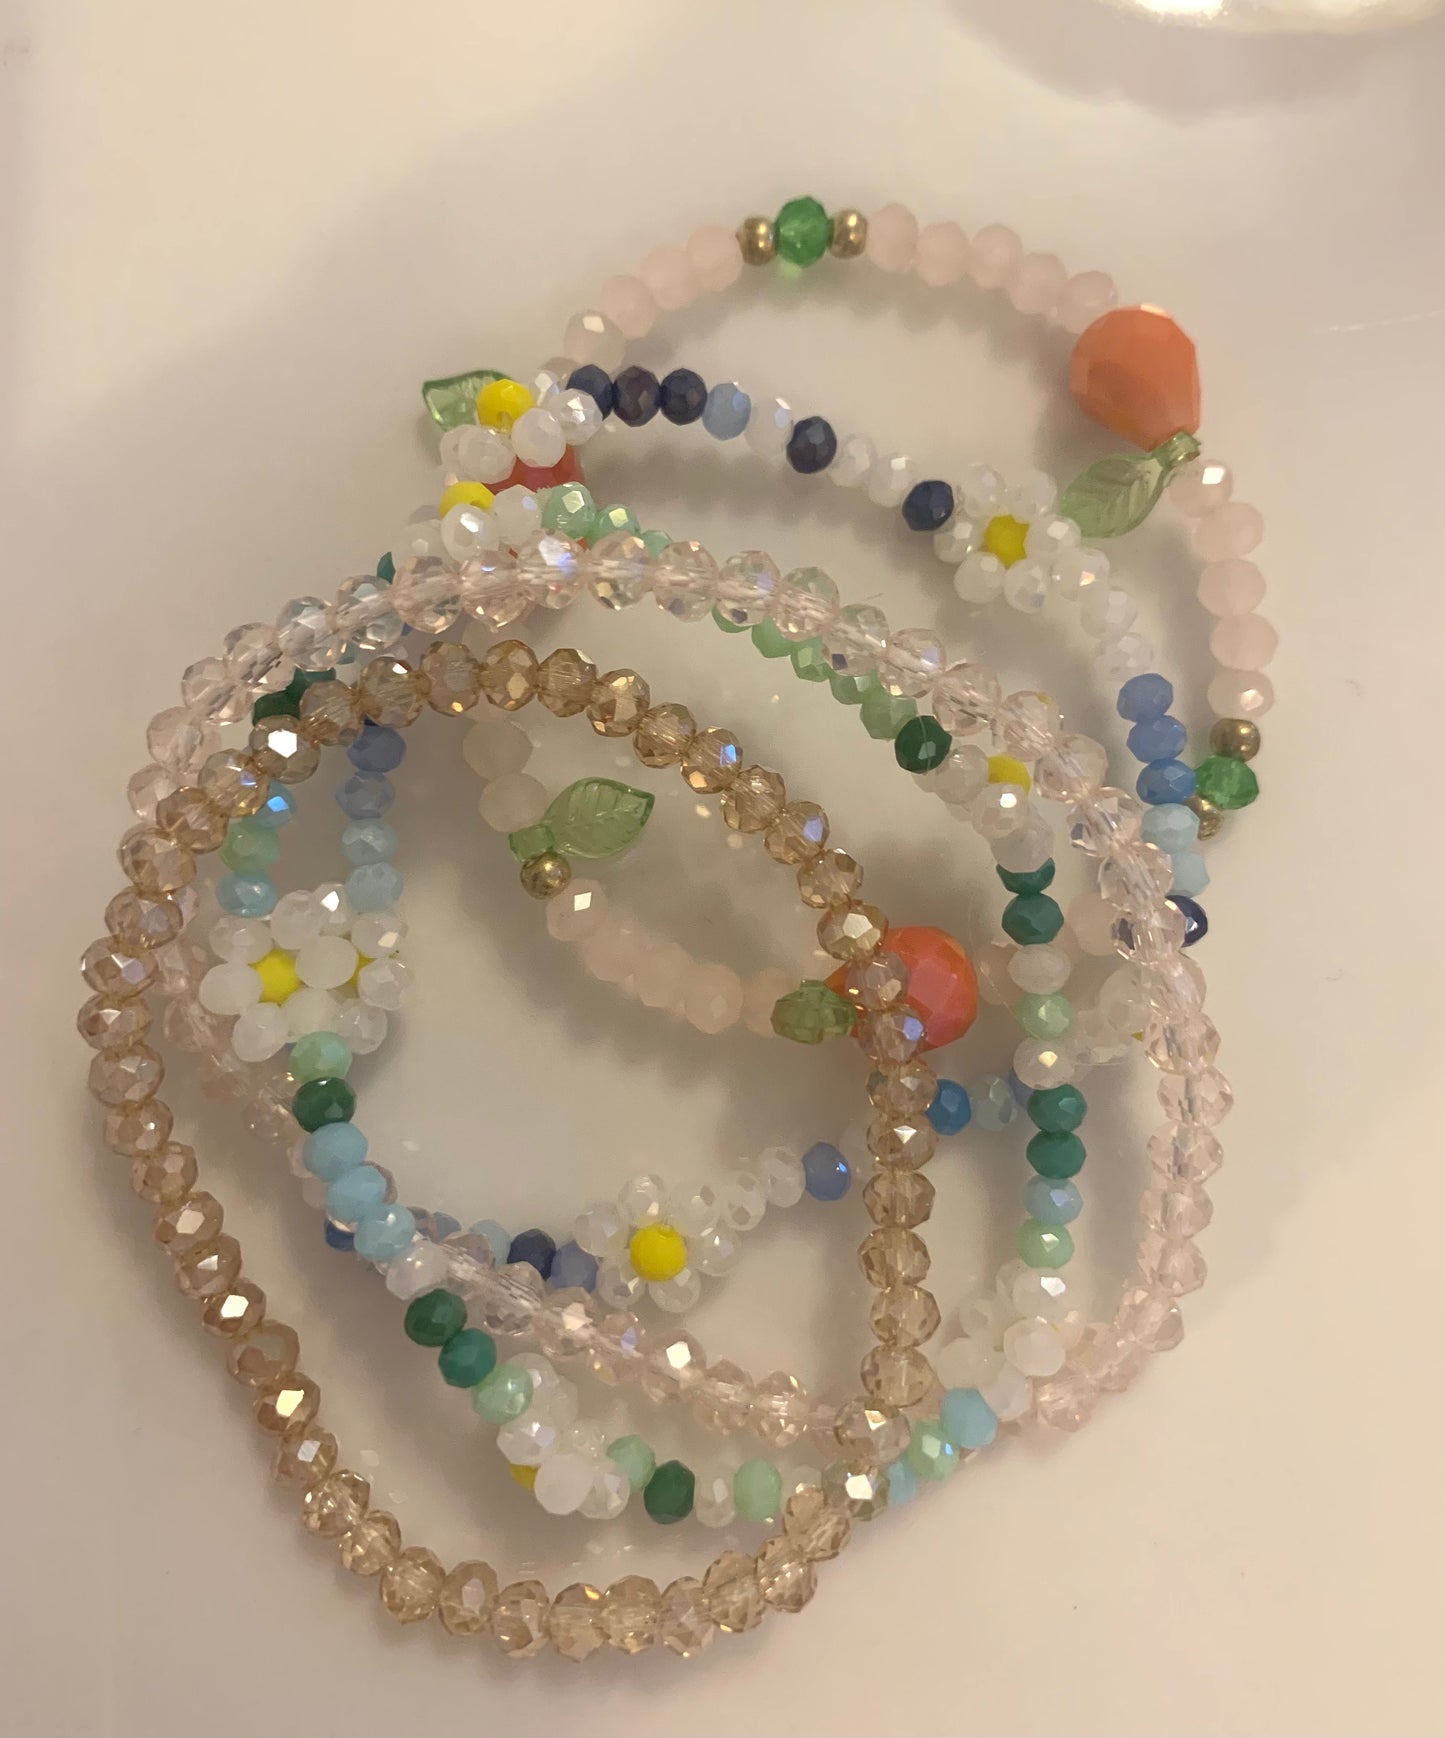 &nbsp;Sparkle Bracelet £3.50  Gorgeous Elasticated Sparkle Bracelet available in Rose, Champagne, Blue Flower, Green Flower, Apricot Flower, Peach Fruit and Leaf Bead  Perfect for layering